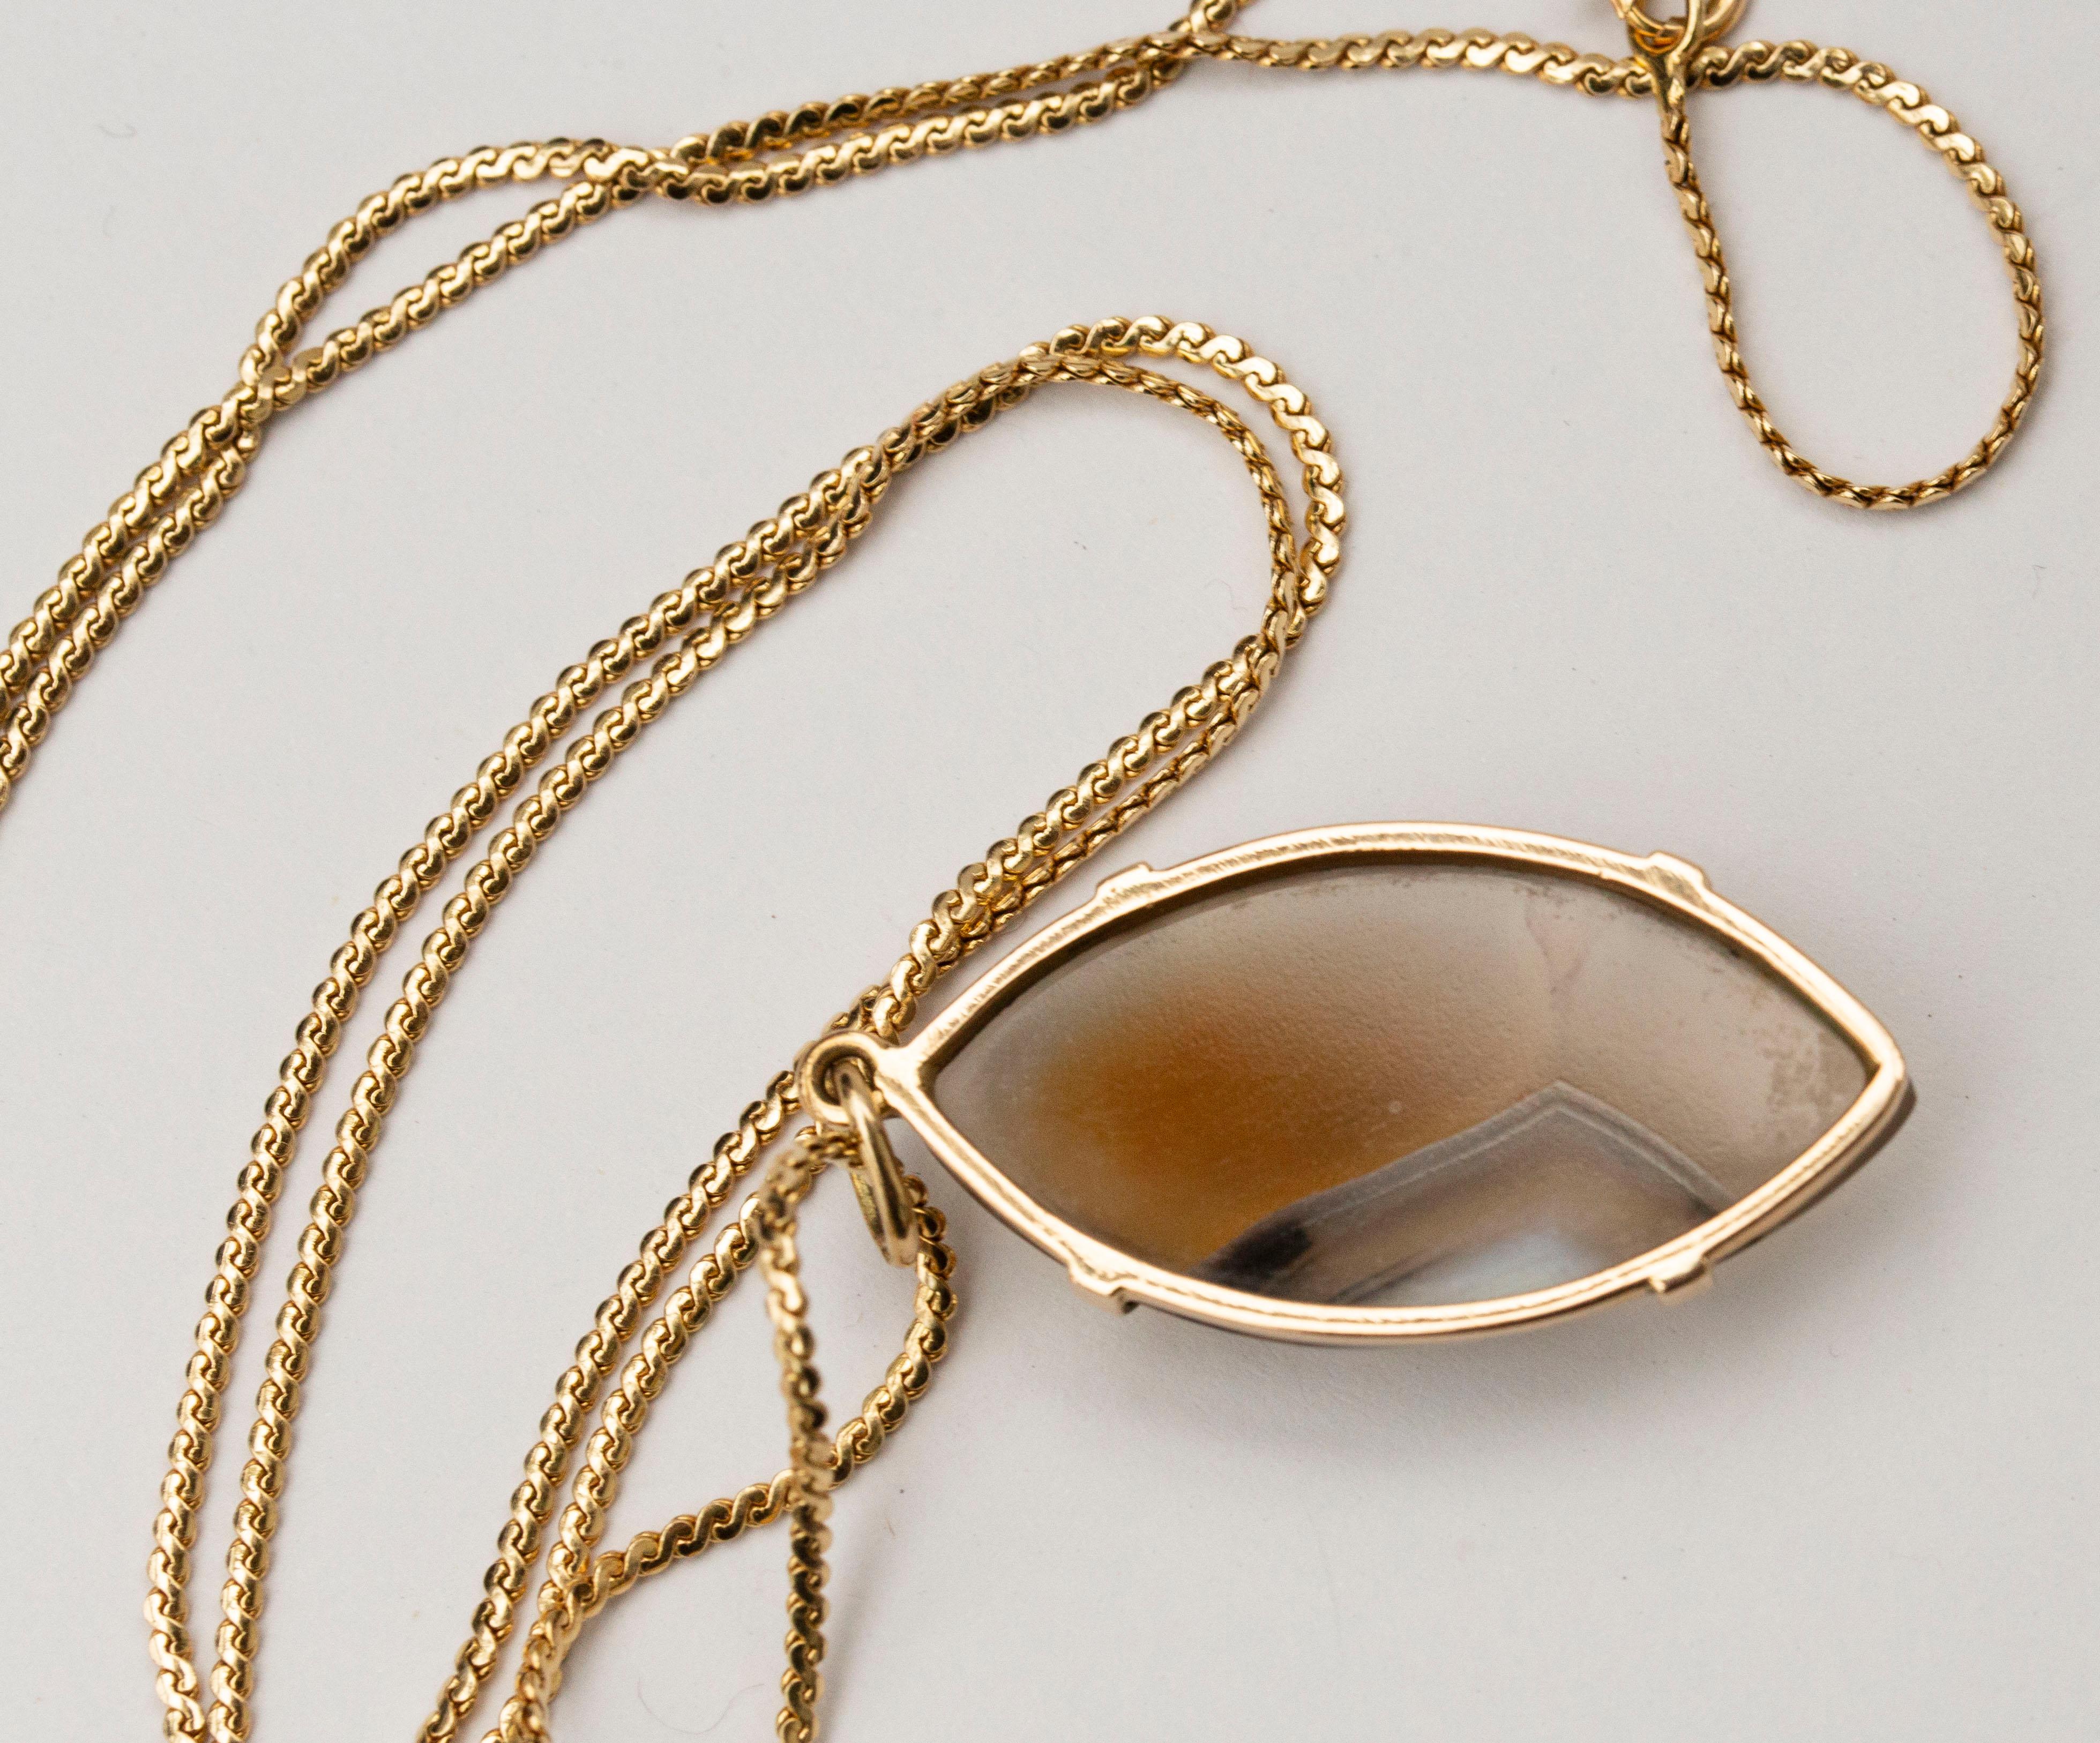 14 Karat Gold Necklace Chain with an Agate Pendant in 14 Karat Gold Setting For Sale 1